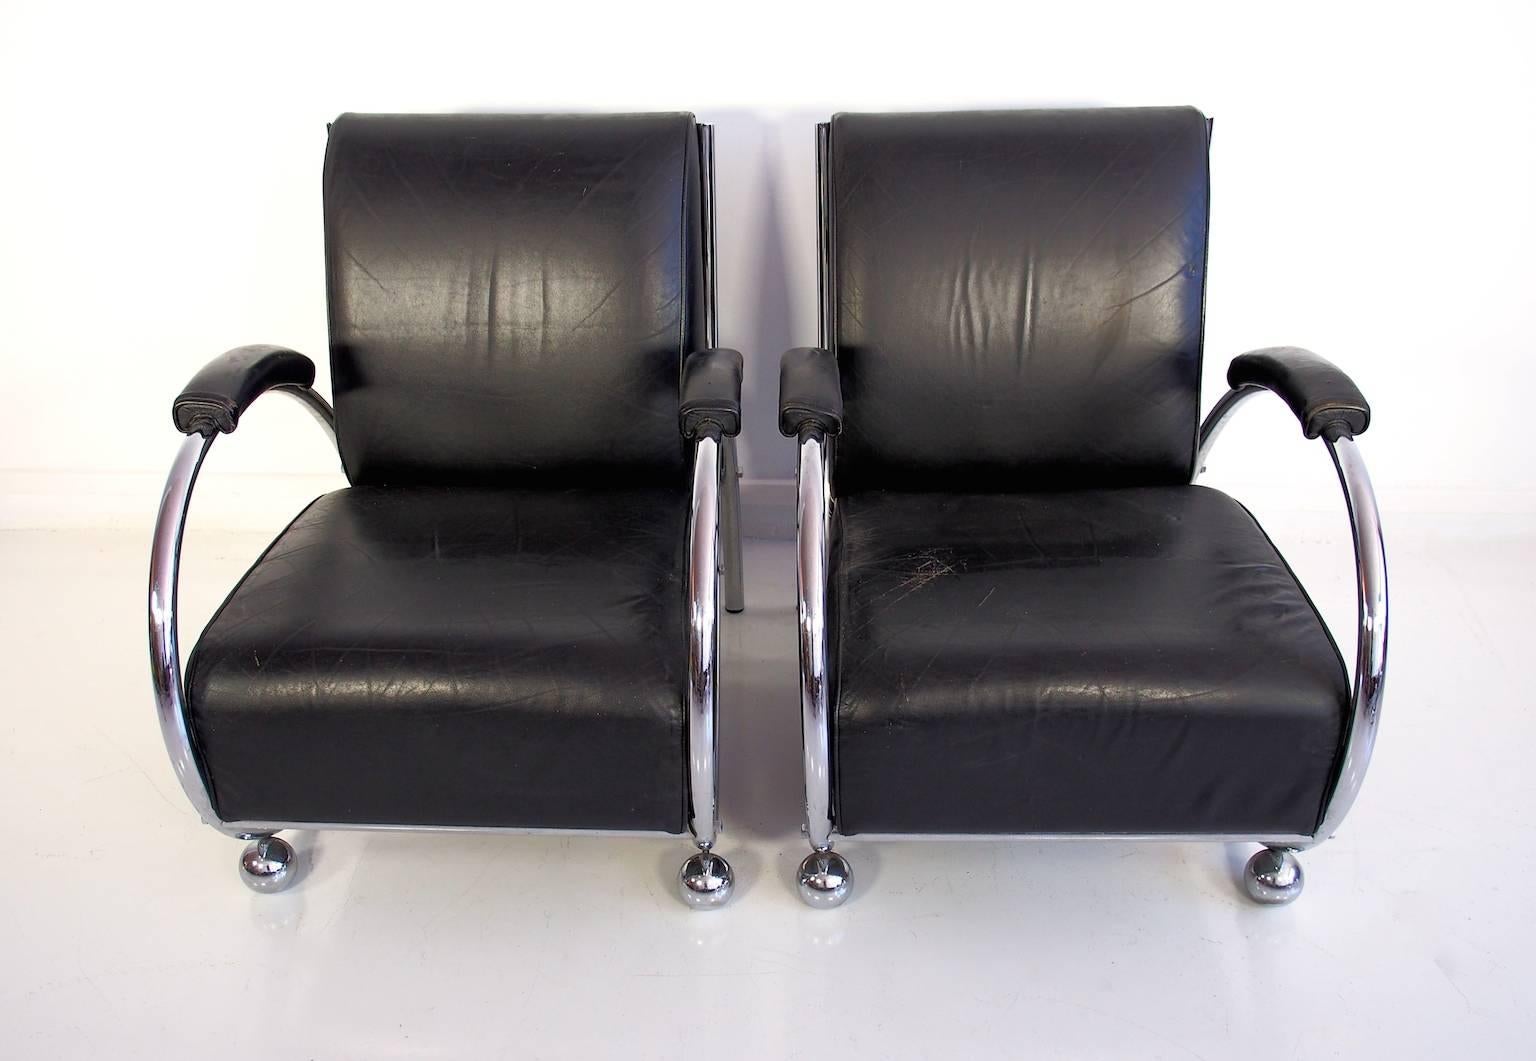 Pair of armchairs chrome and black leather armchairs, circa 1950s, Germany. Chrome-plated base, rounded tubular steel construction. Front padded on two ball feet and rear flared legs. Seat, back and armrests covered in black leather.